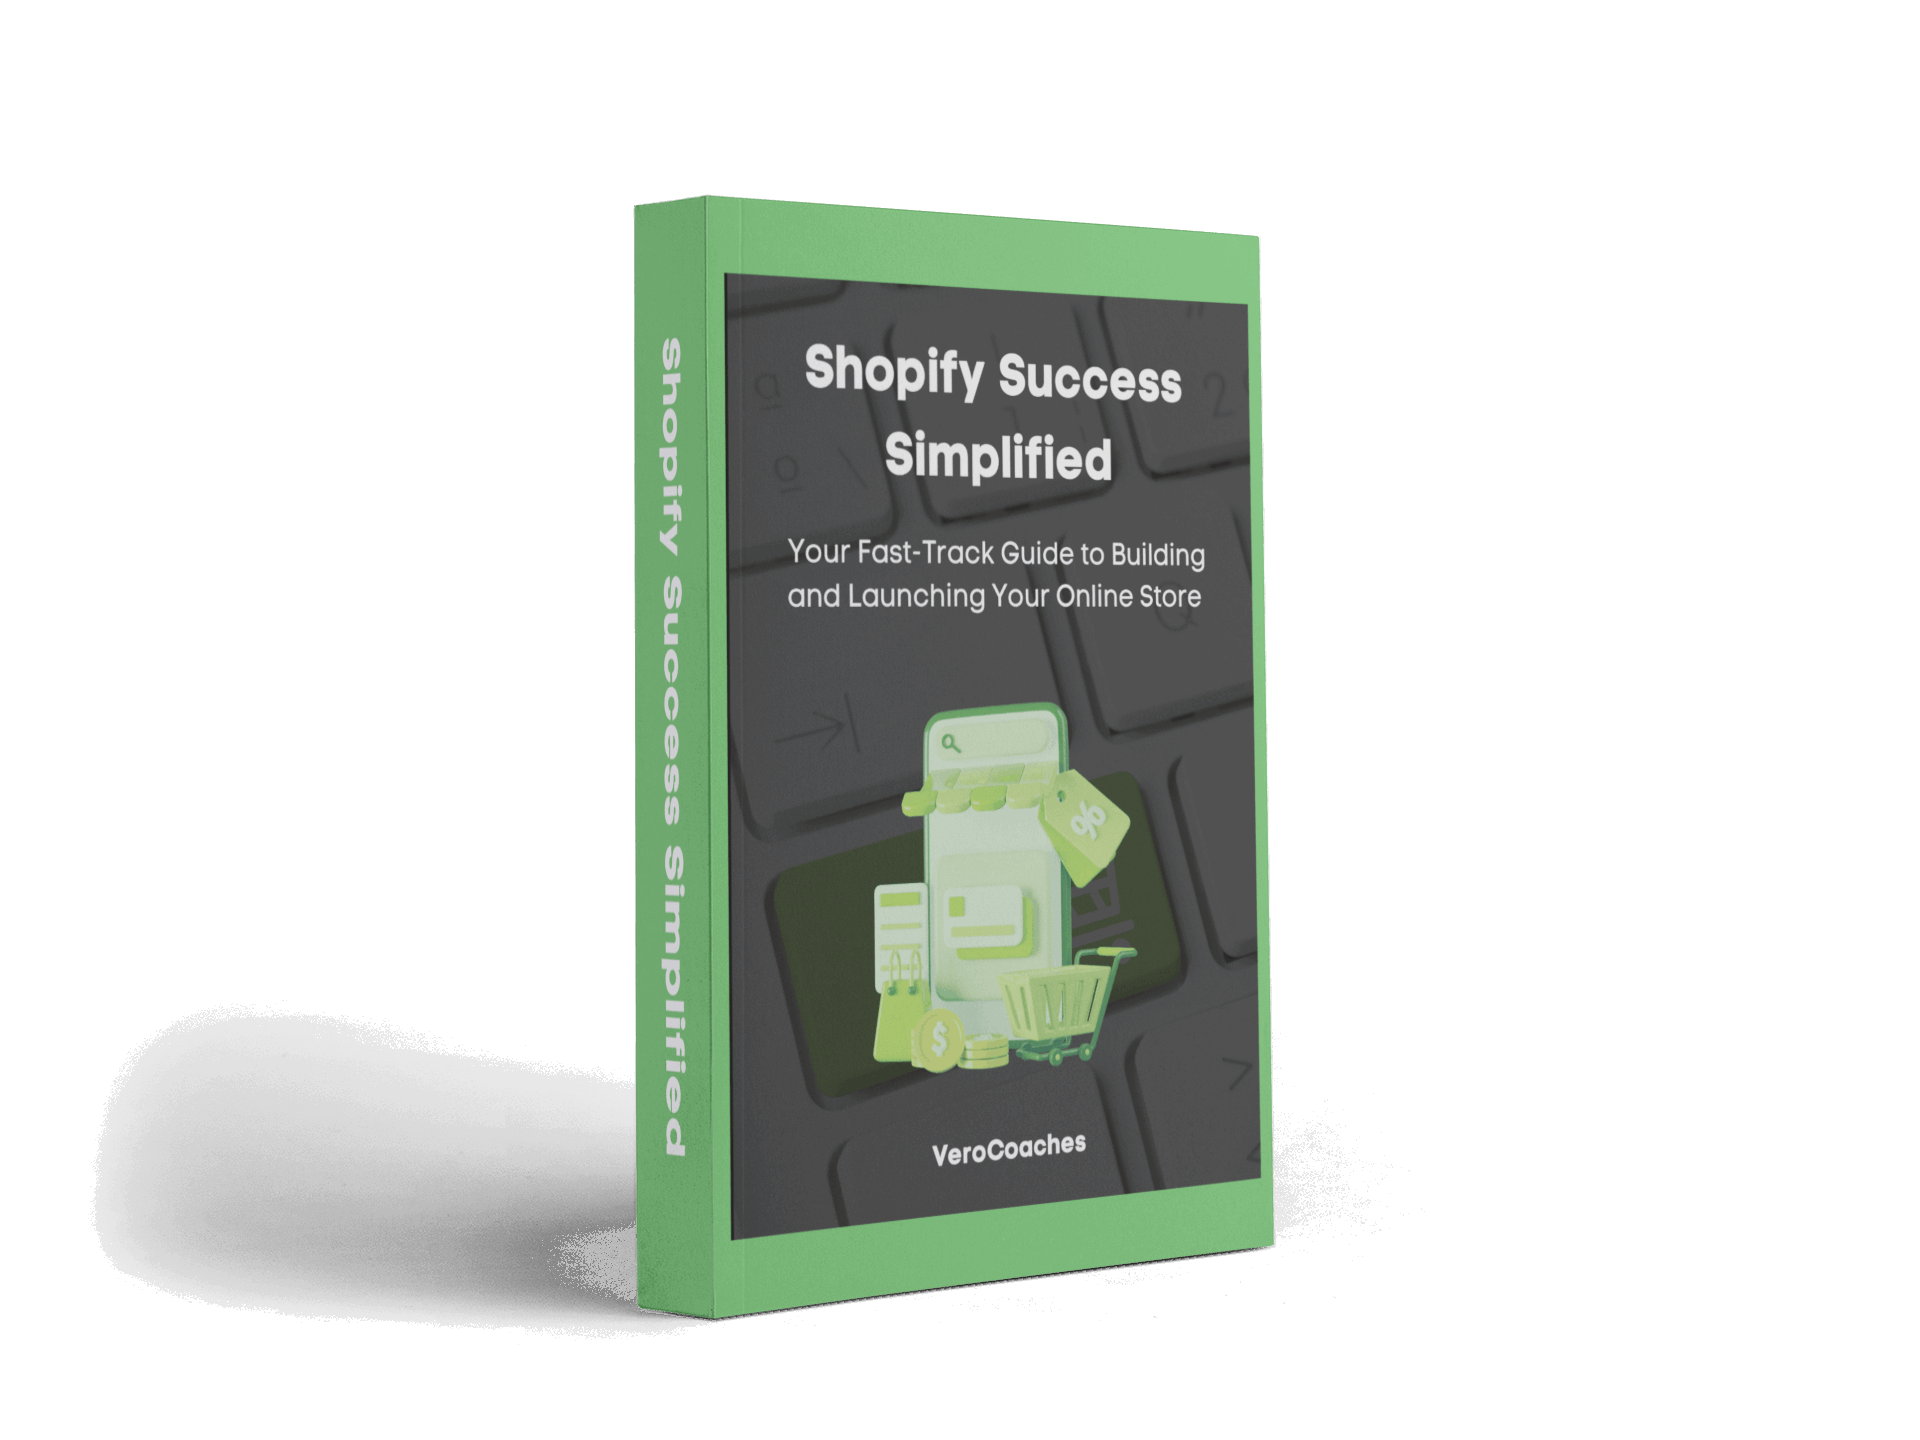 Cover of Shopify Success Simplified Guide showing step-by-step e-commerce launch process